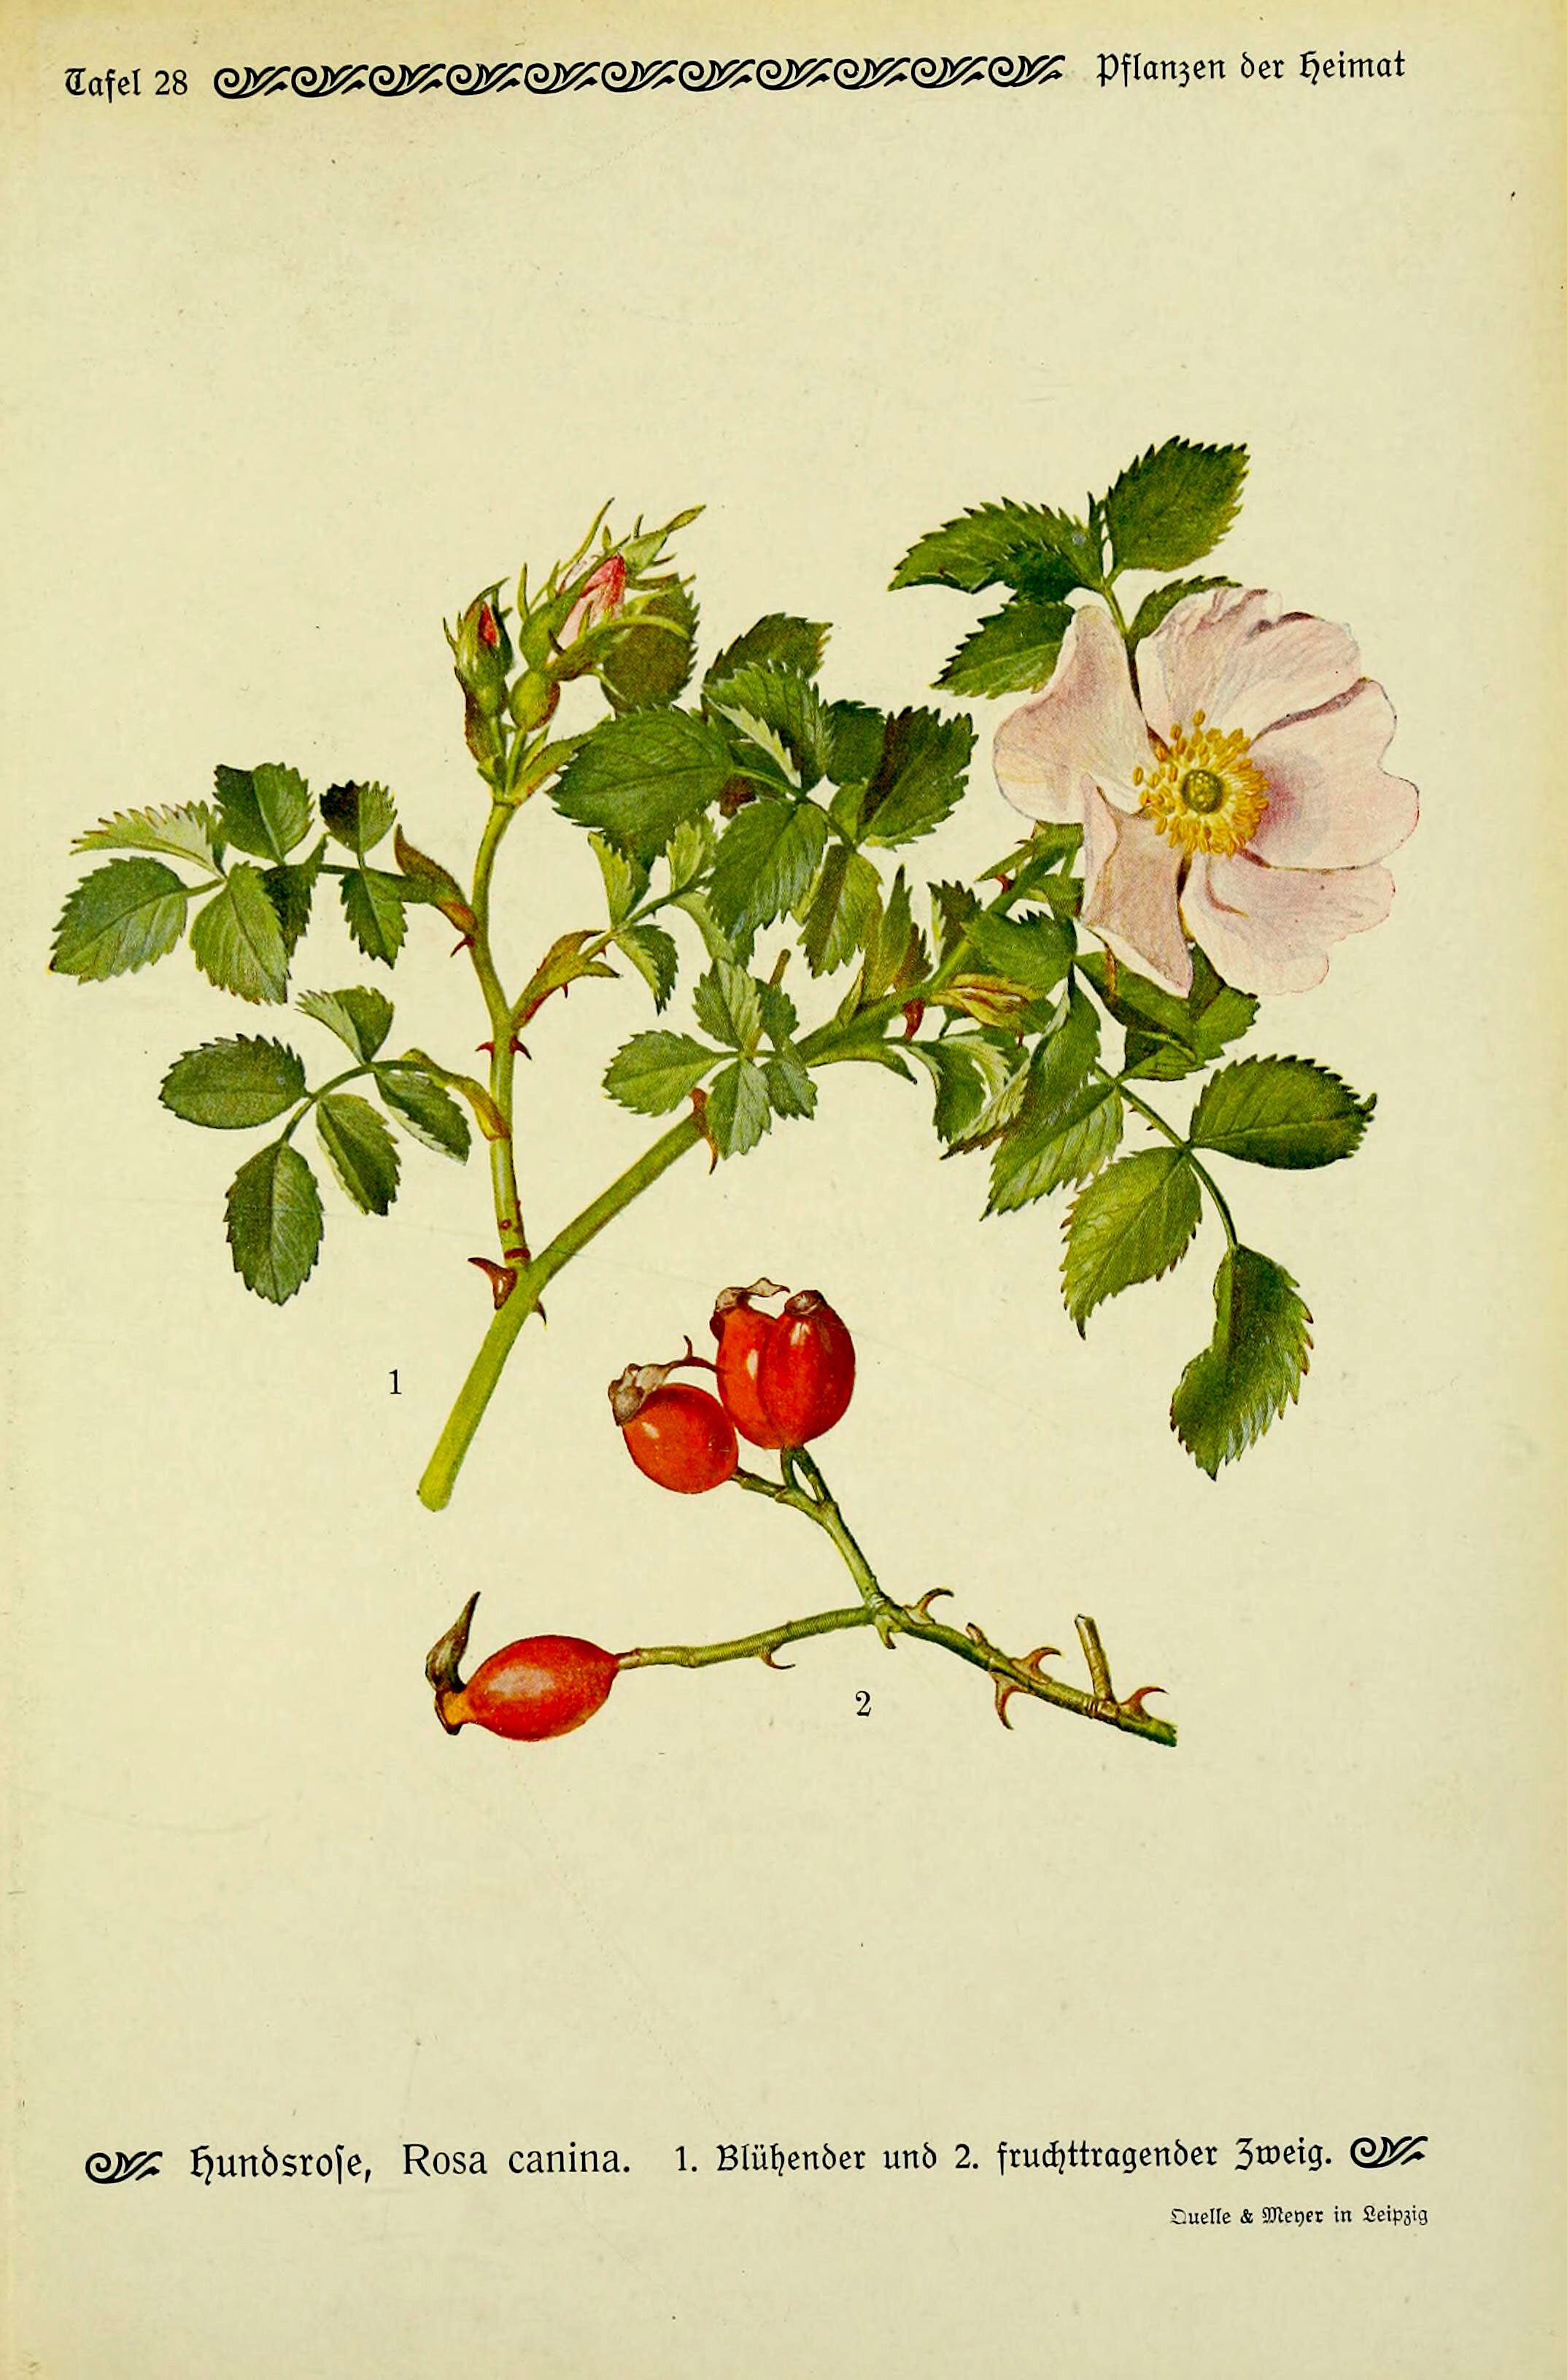 Bartenders' guide to foraging: Rose petals